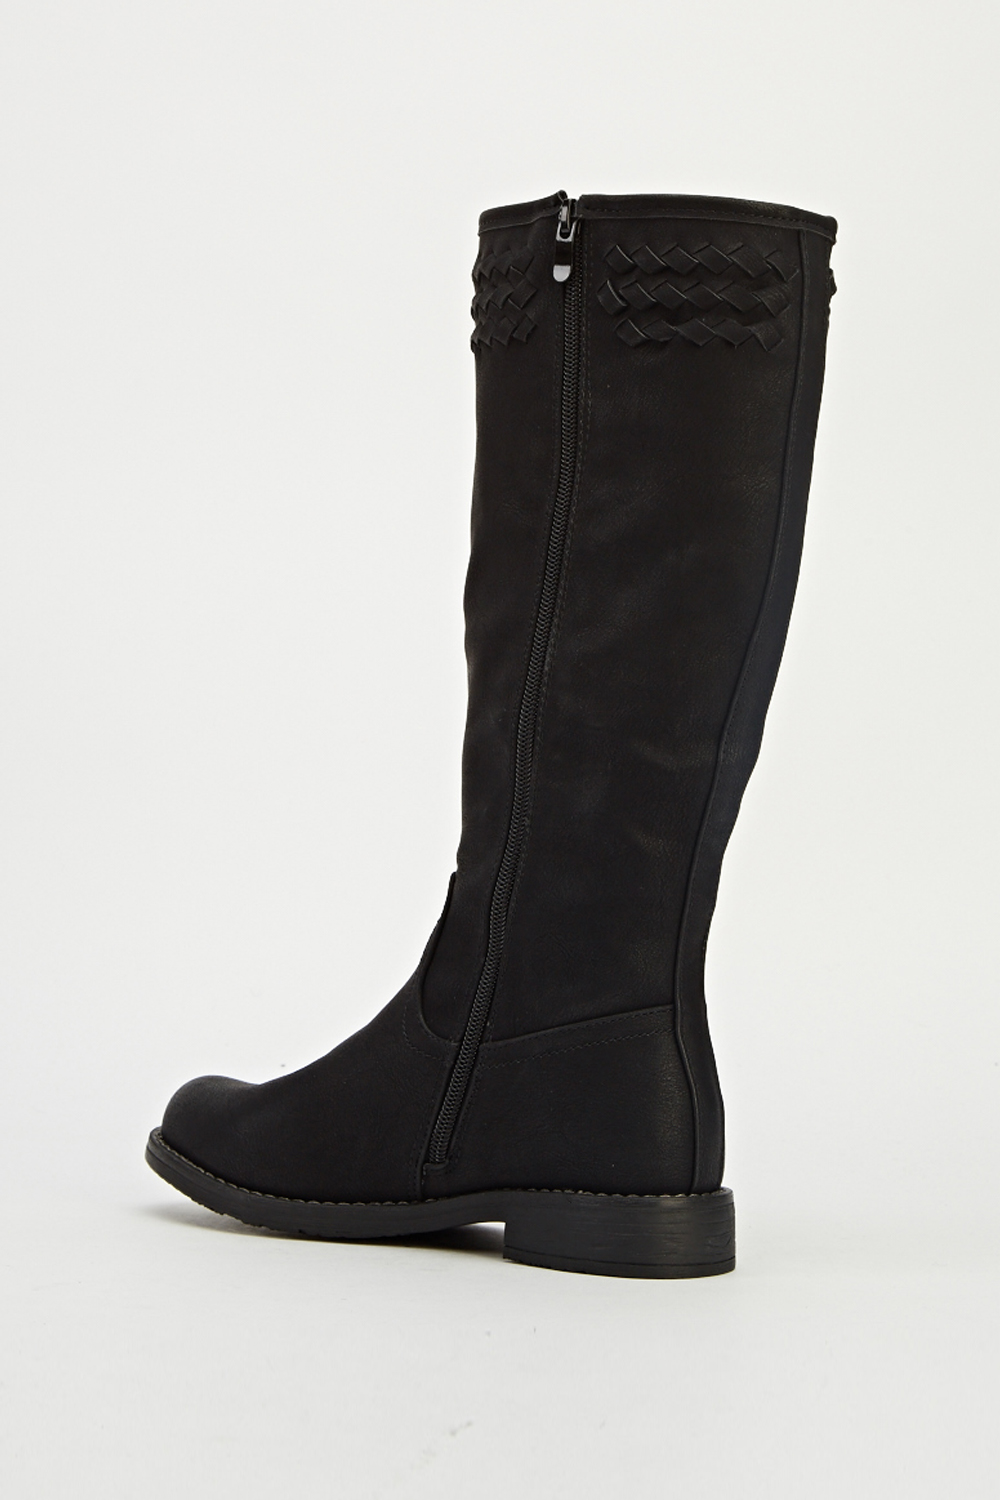 Casual Black Boots - Just $7